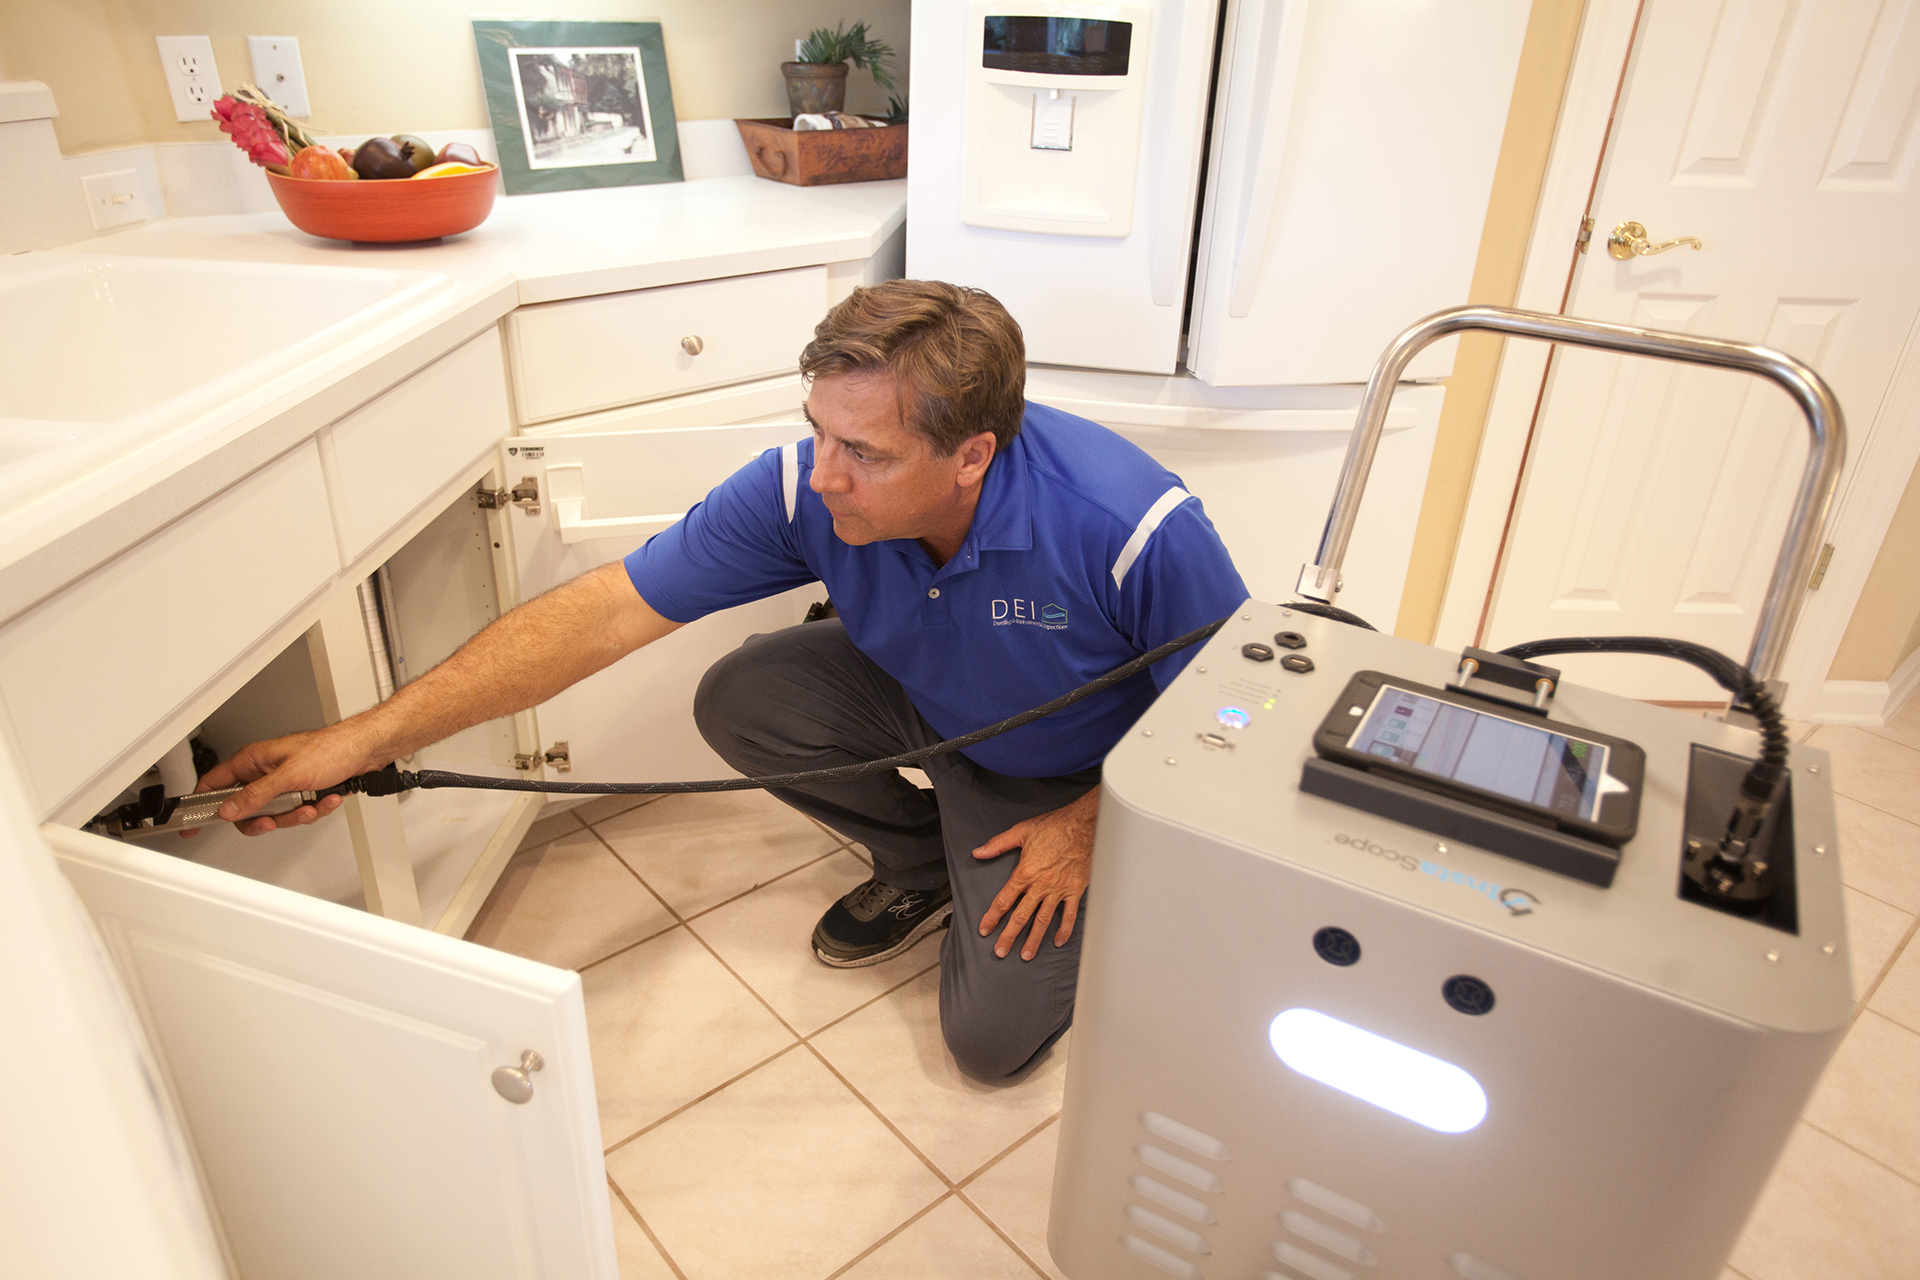 DEI - Mold Inspections, House Home Air Quality - Insurance Inprections (13)